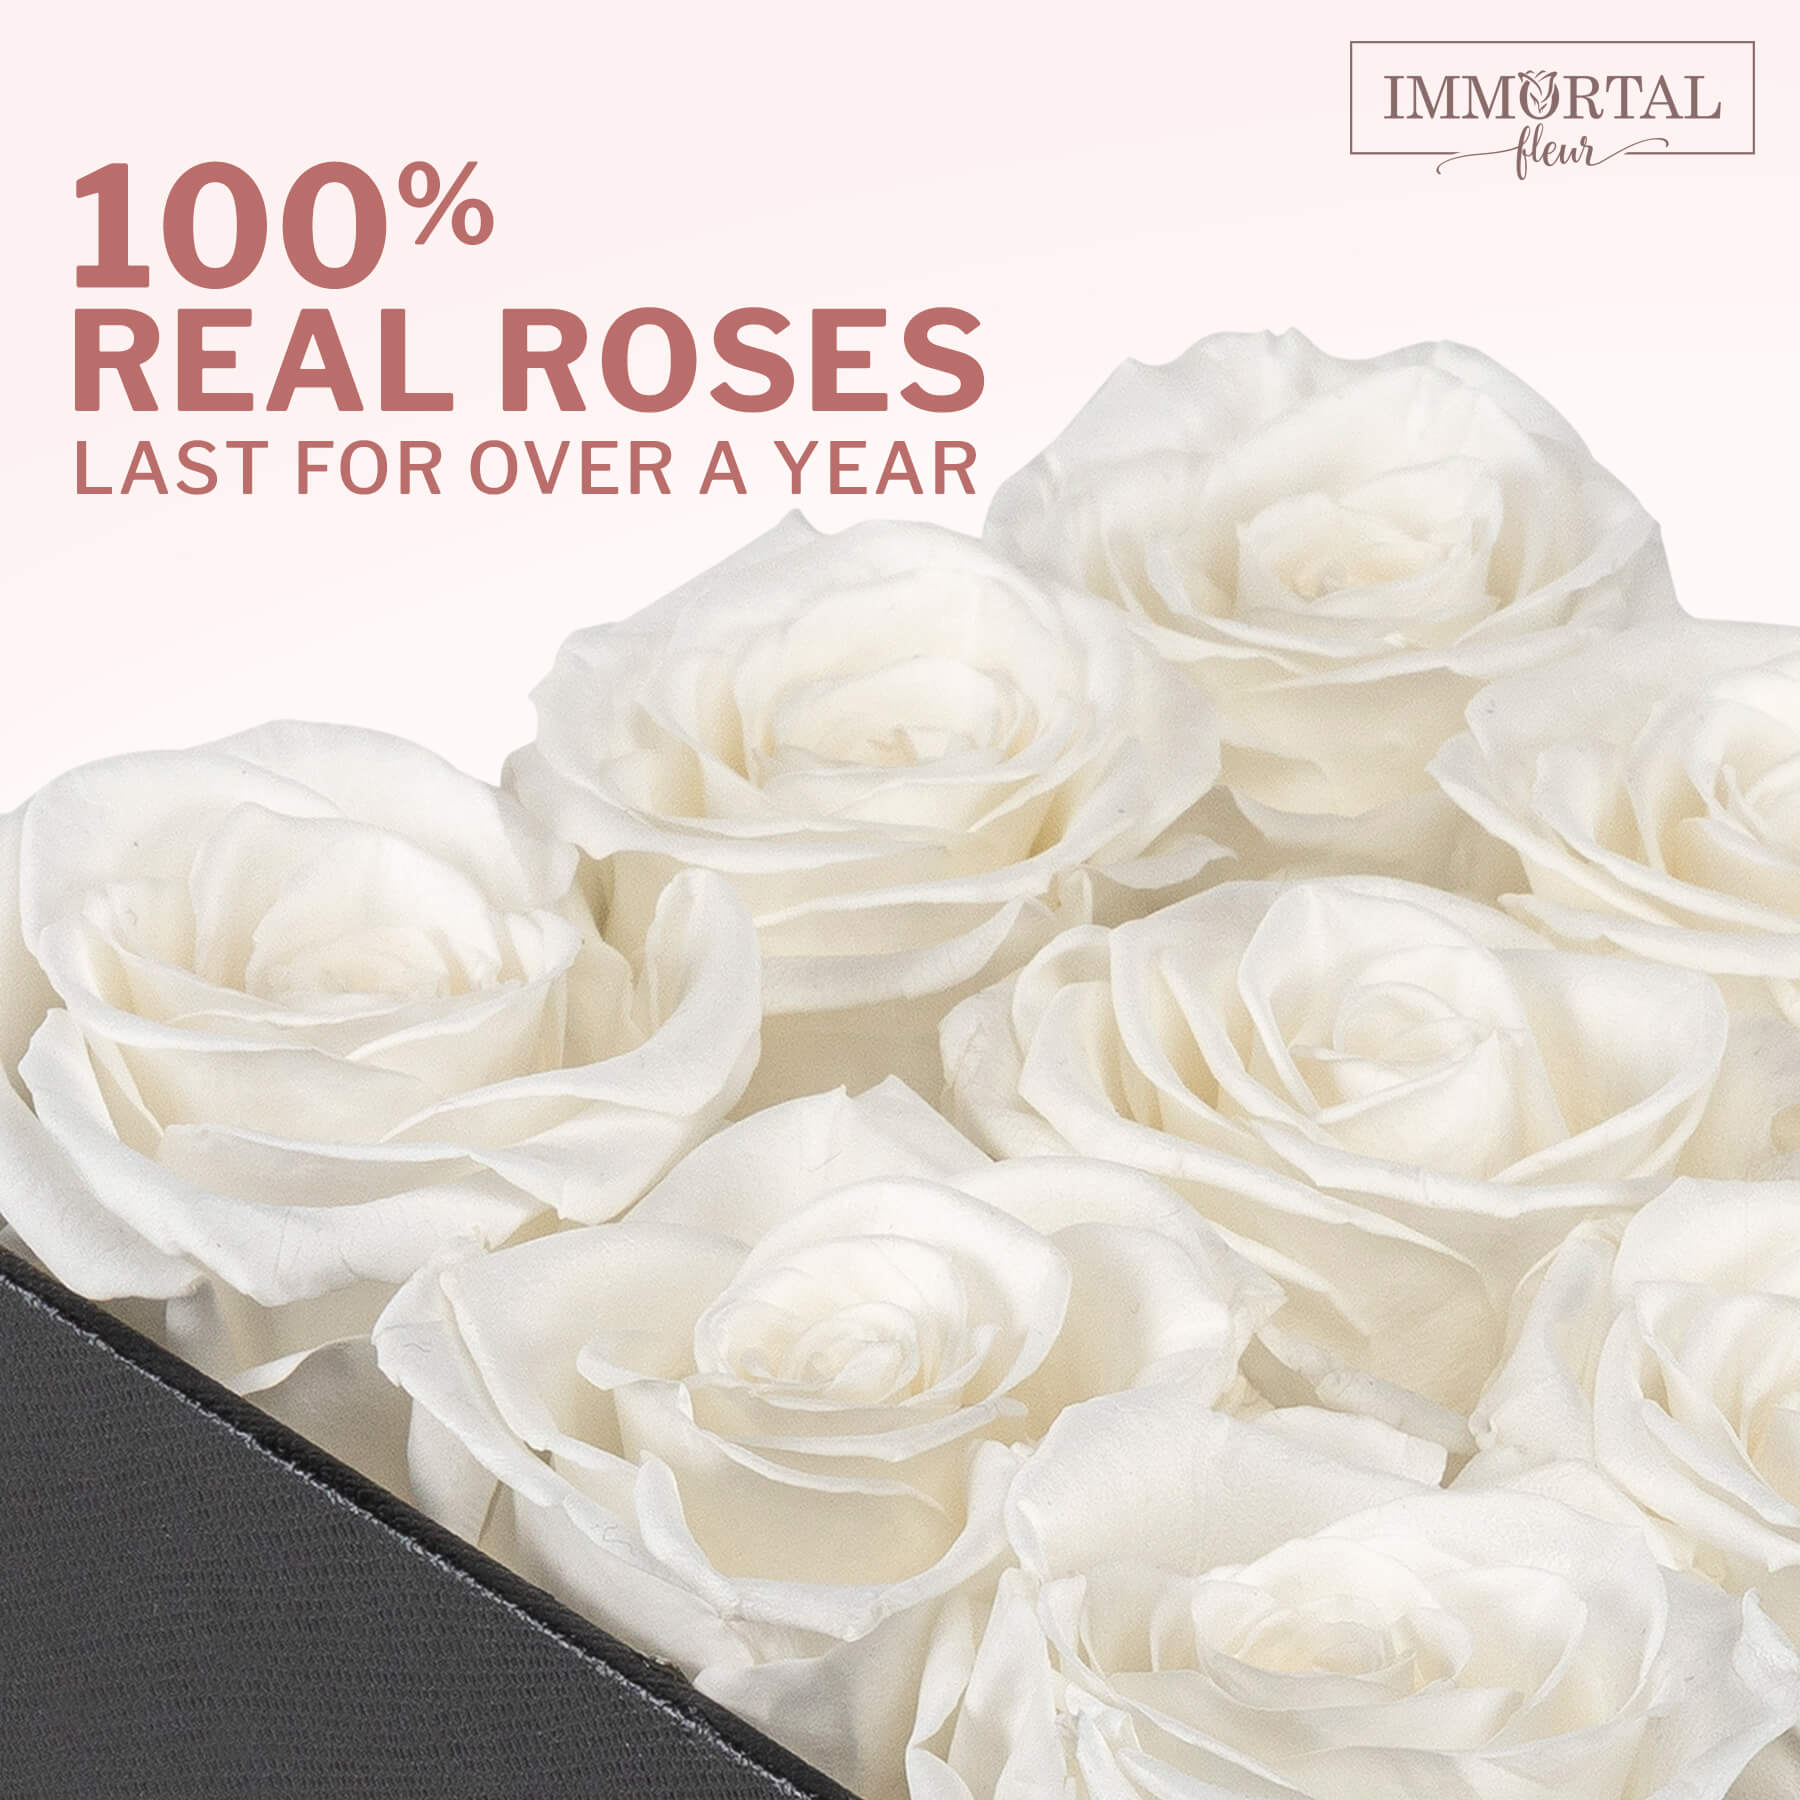 16 White Natural Preserved Roses - Last Over A Year